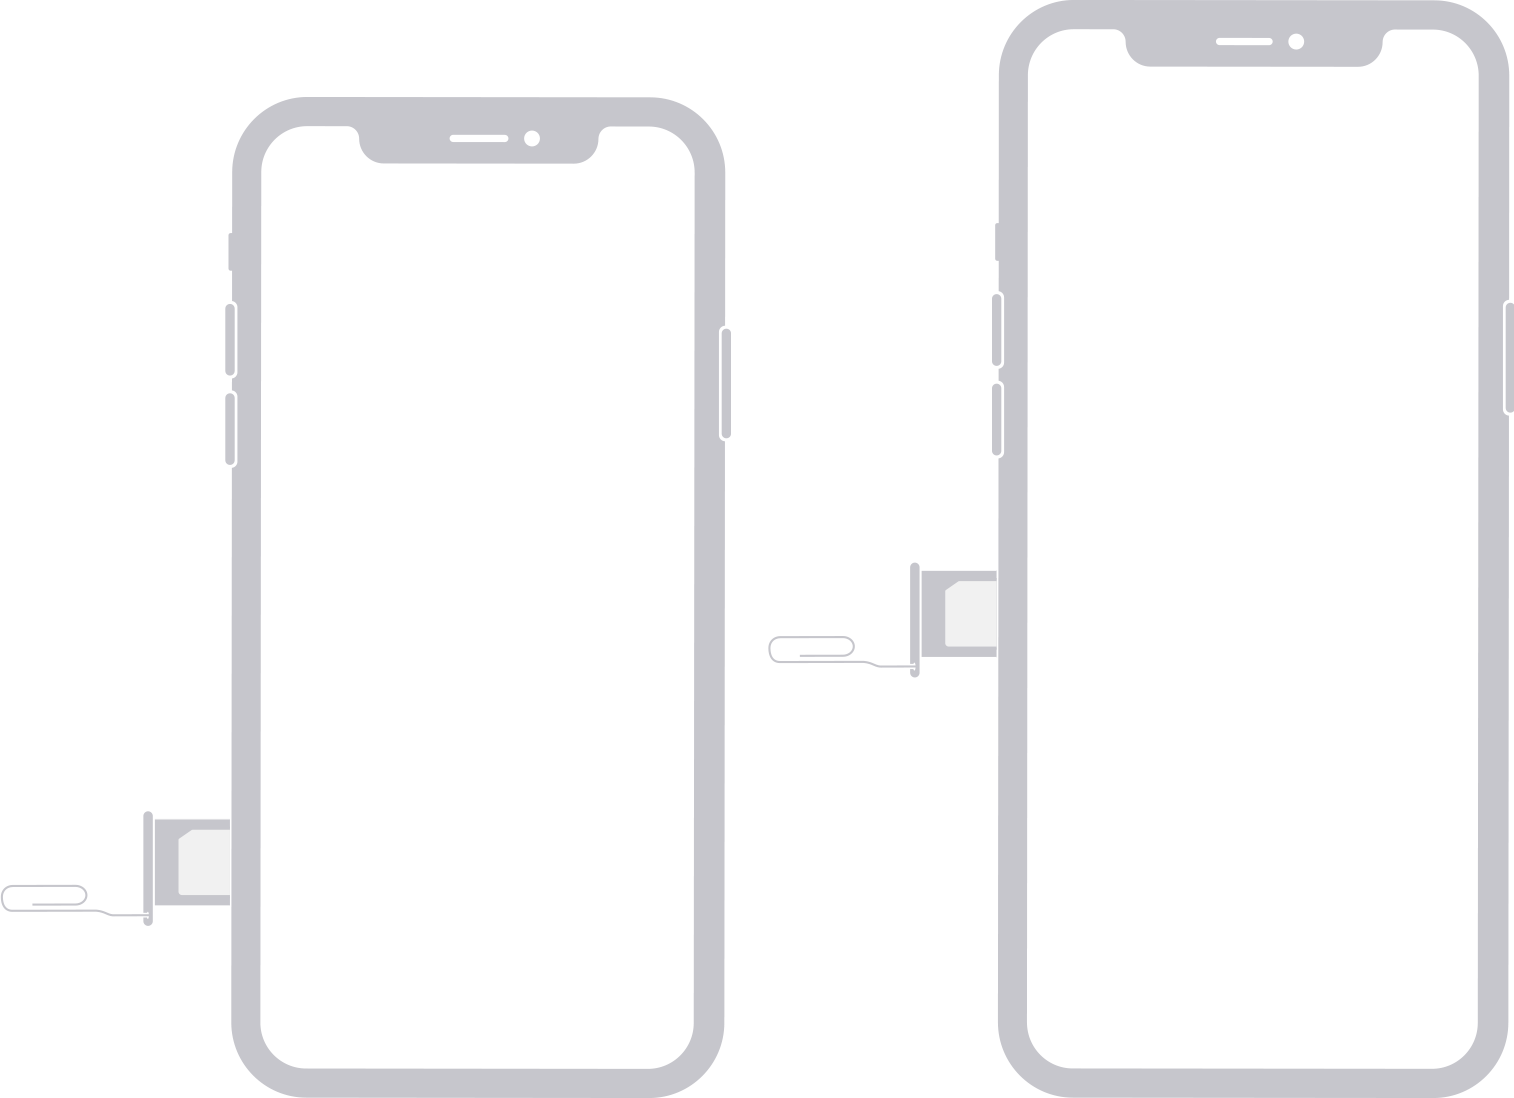 Image shows SIM on left-hand side of iPhone